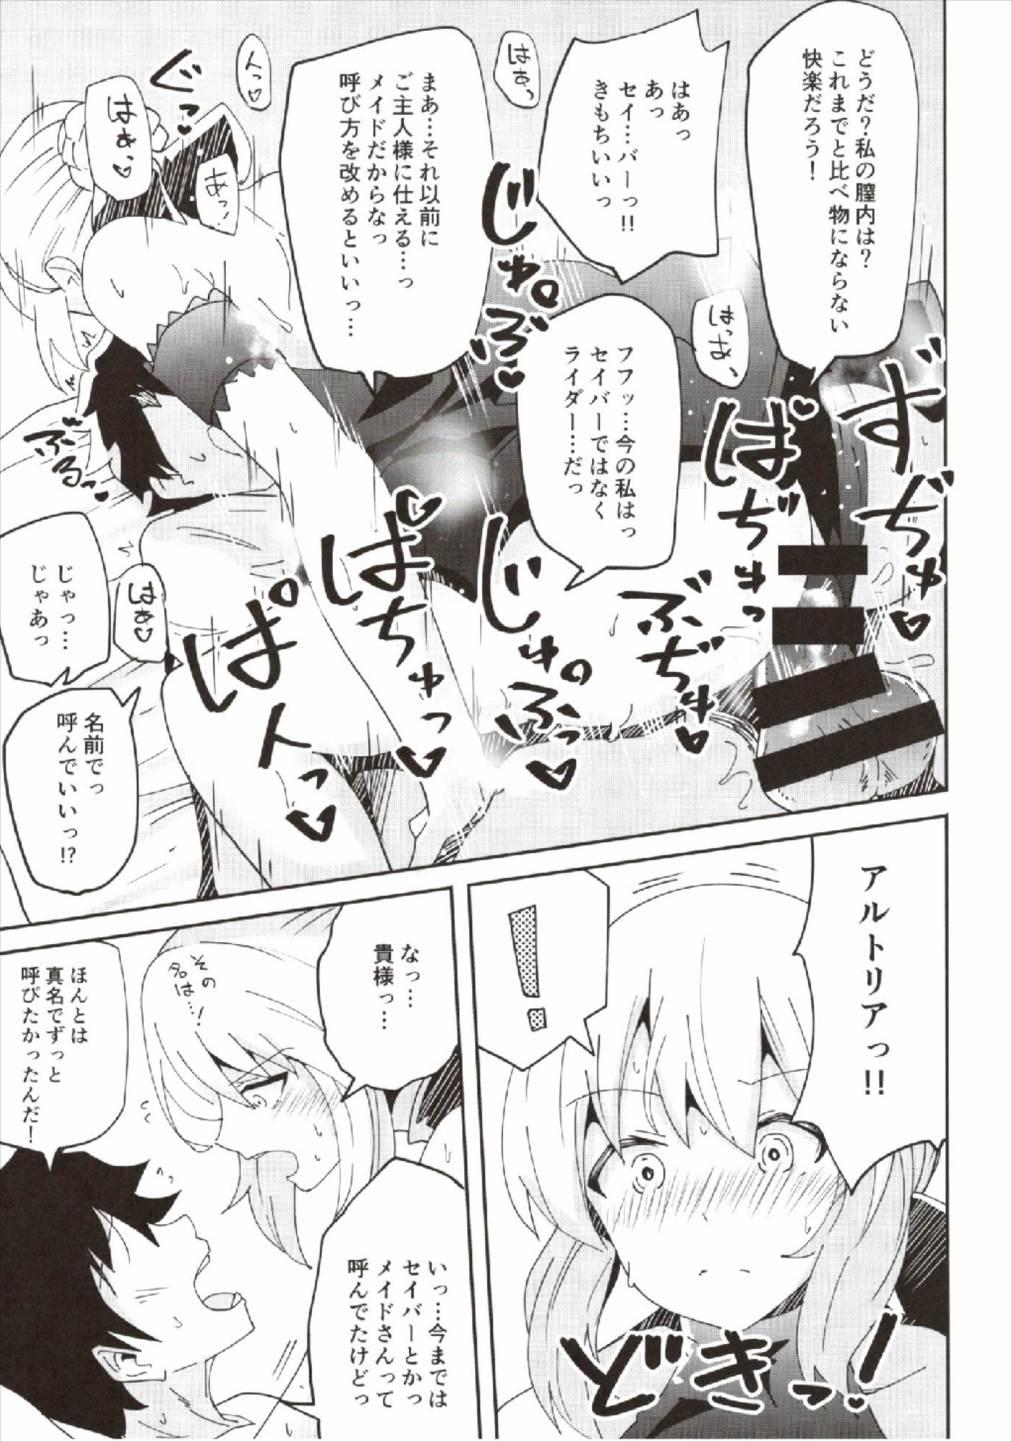 Best Blowjobs Dosukebe Saber Wars 2 - Fate grand order Thot - Page 13